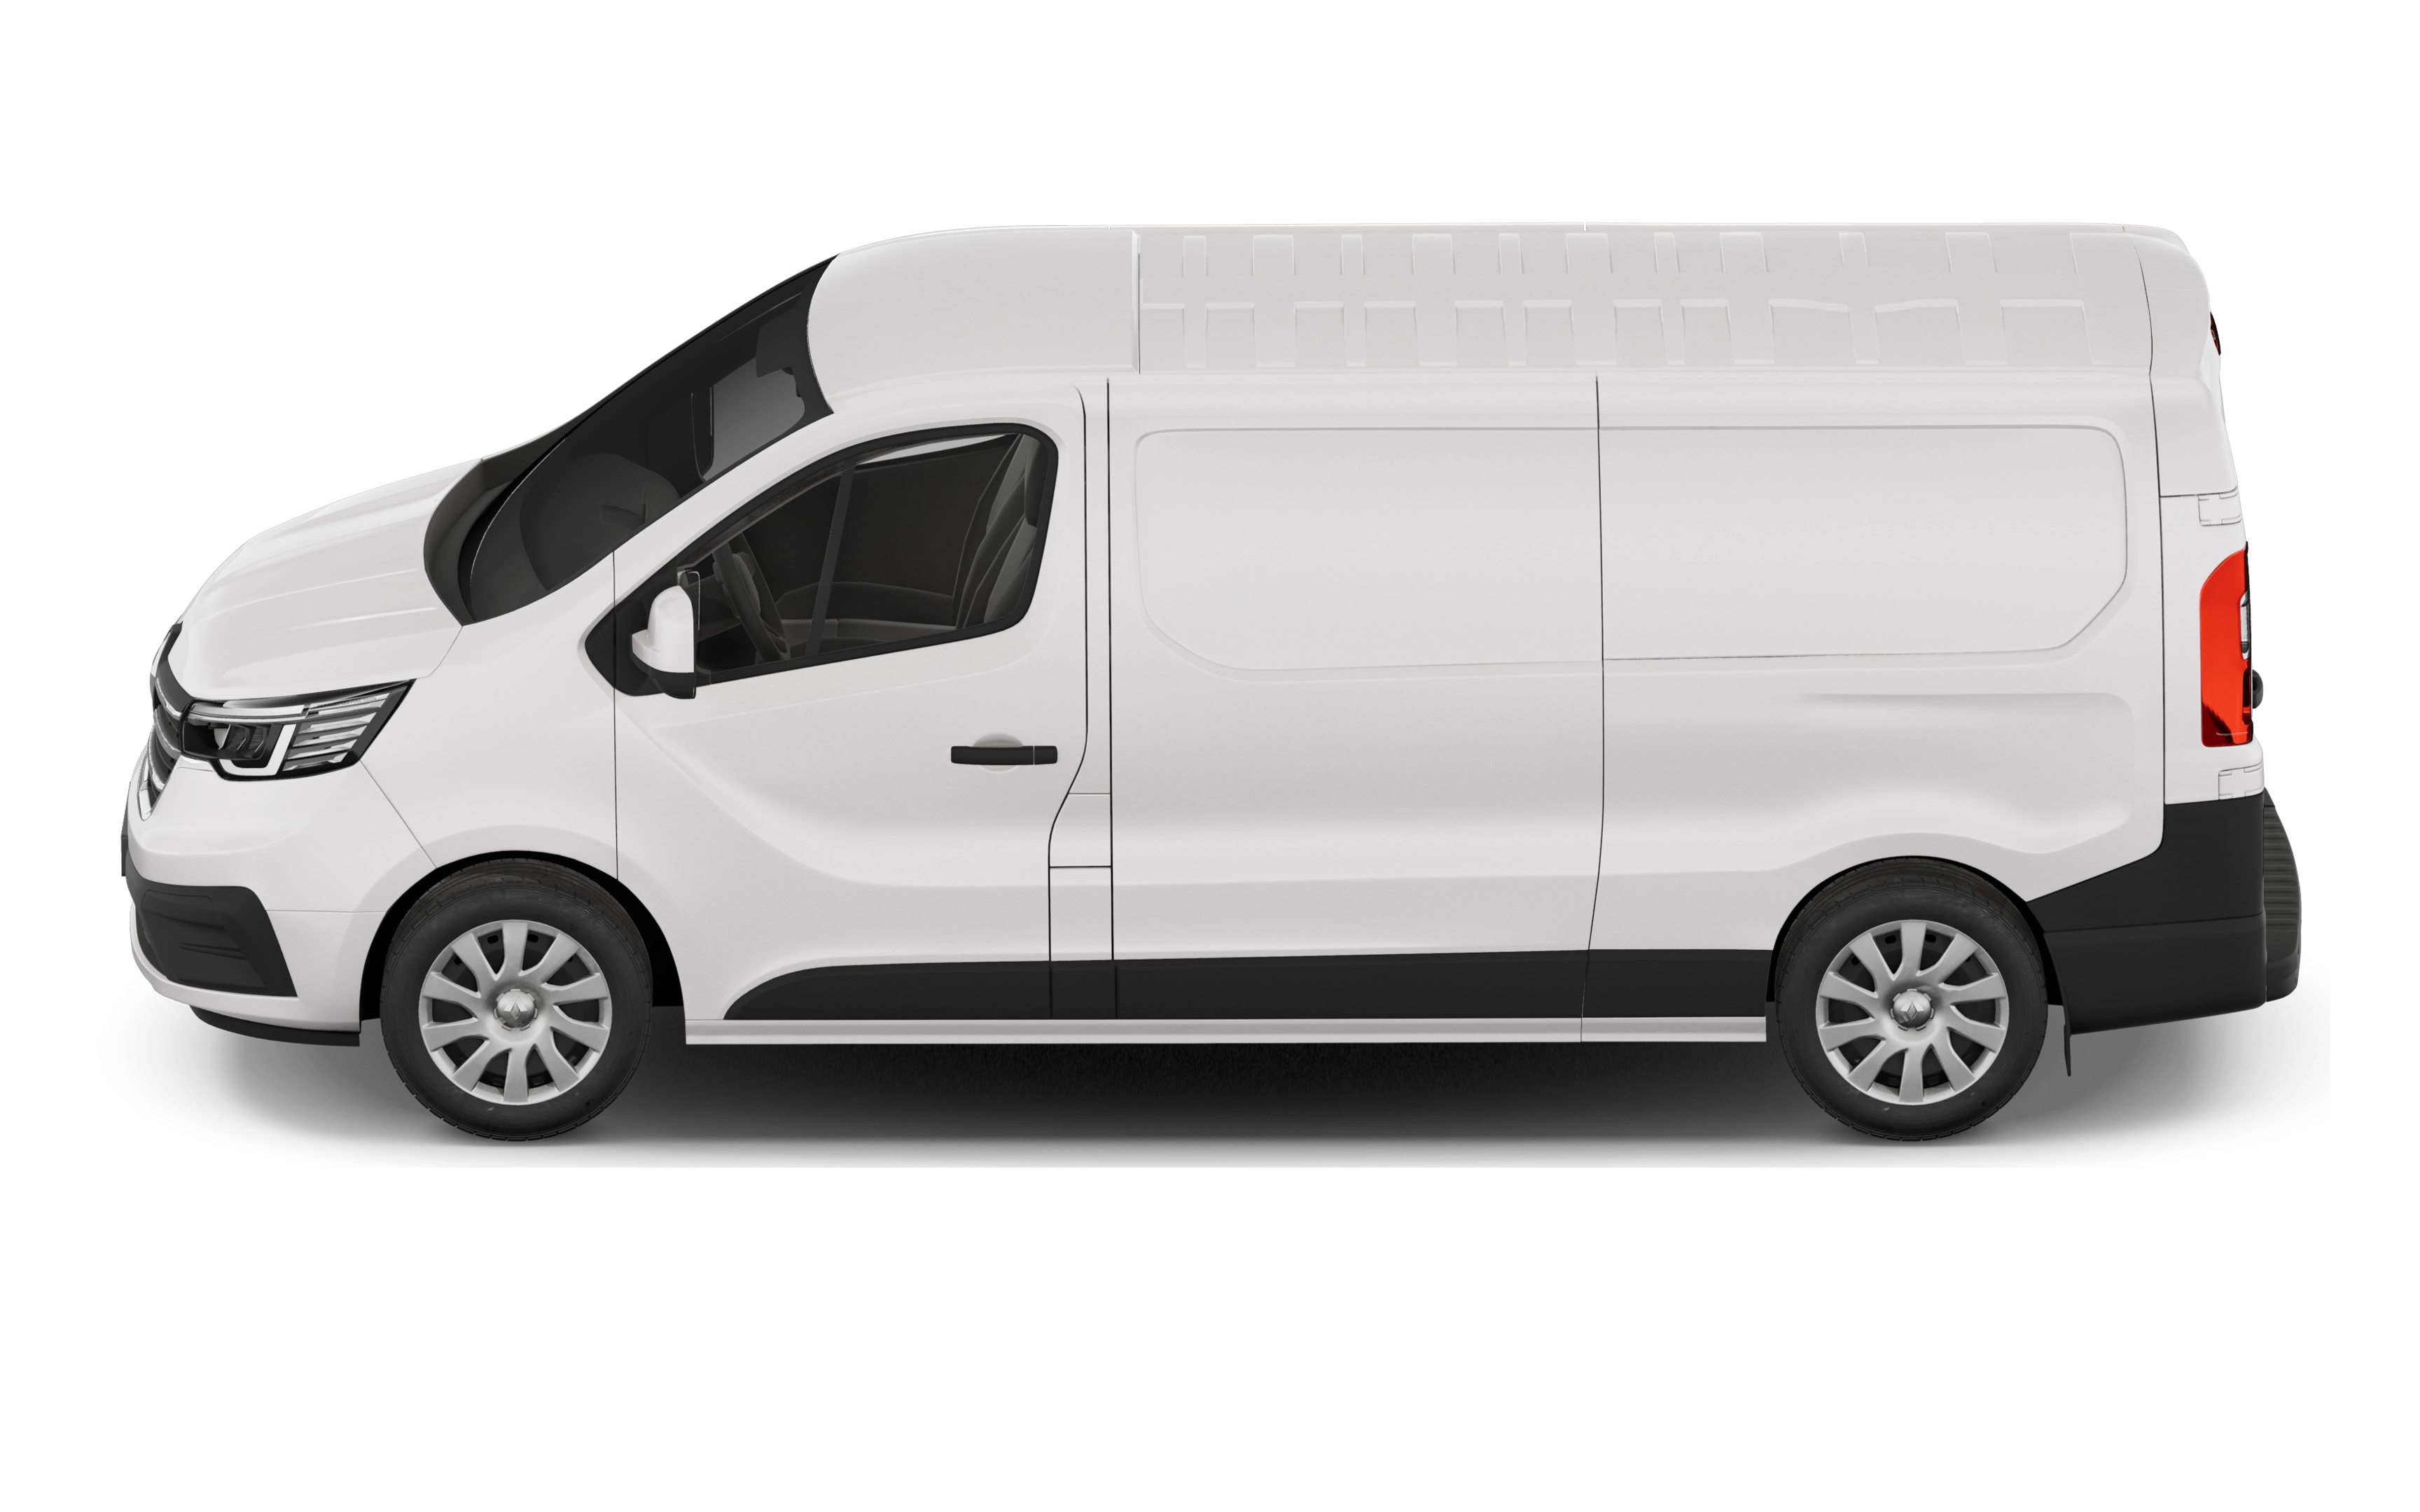 Renault trafic e-tech lwb electric lh30 90kw 52kwh advance high roof van auto